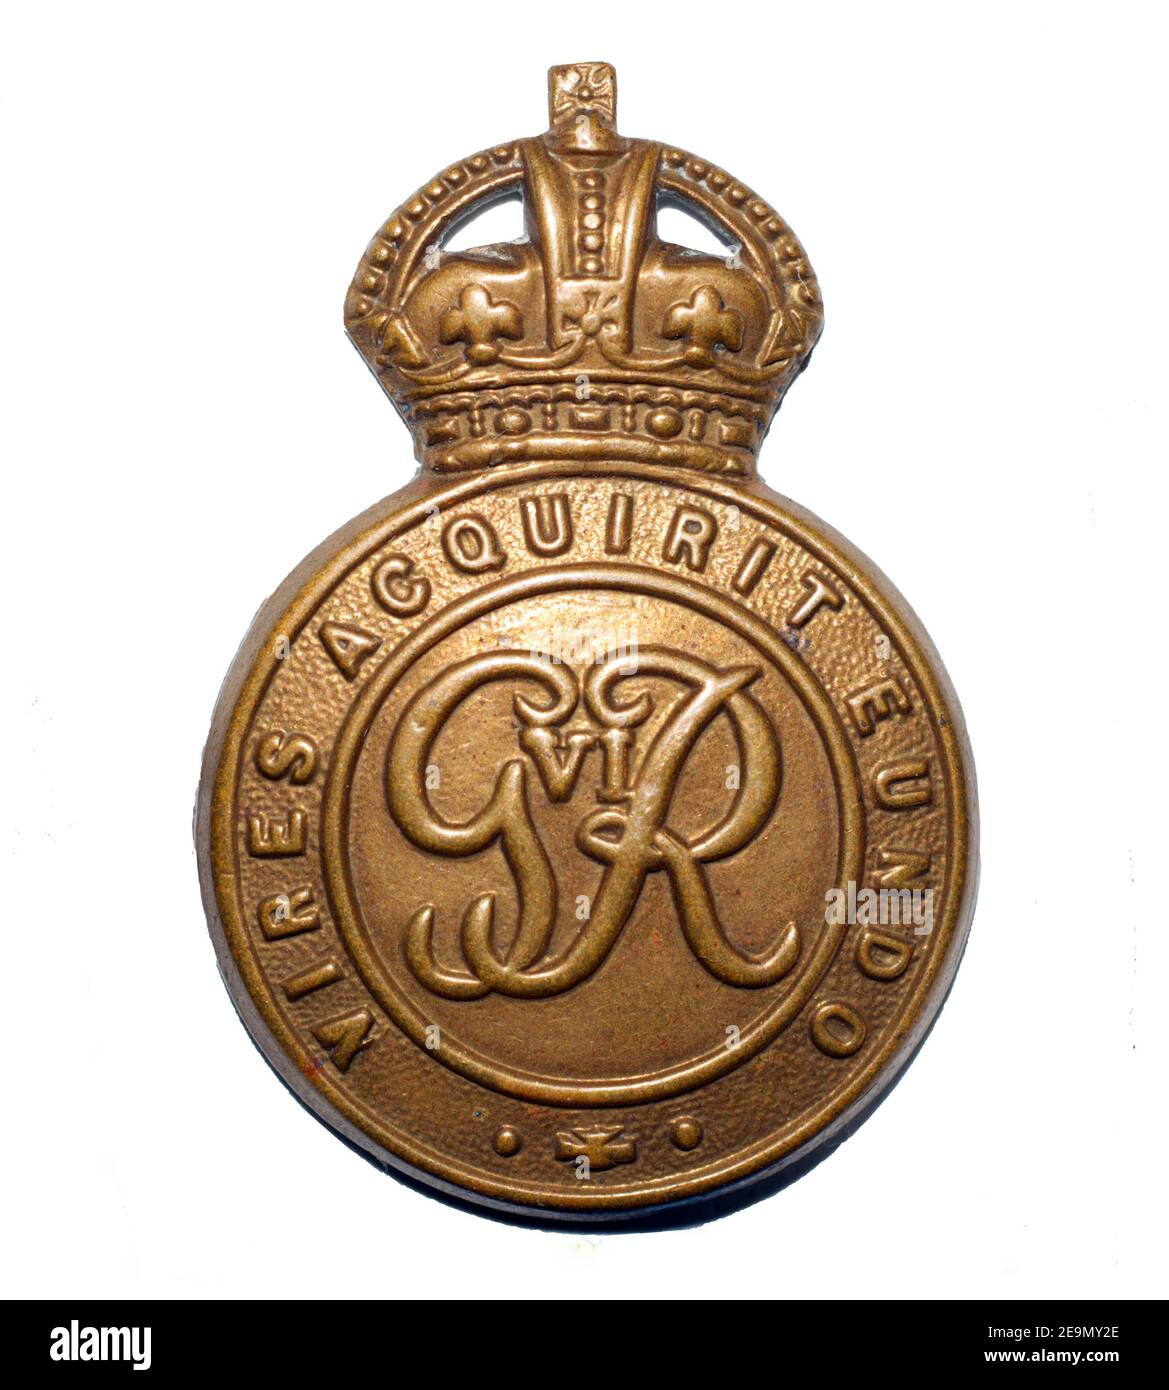 A cap badge of the Royal Military College c. 1936-1947. Stock Photo